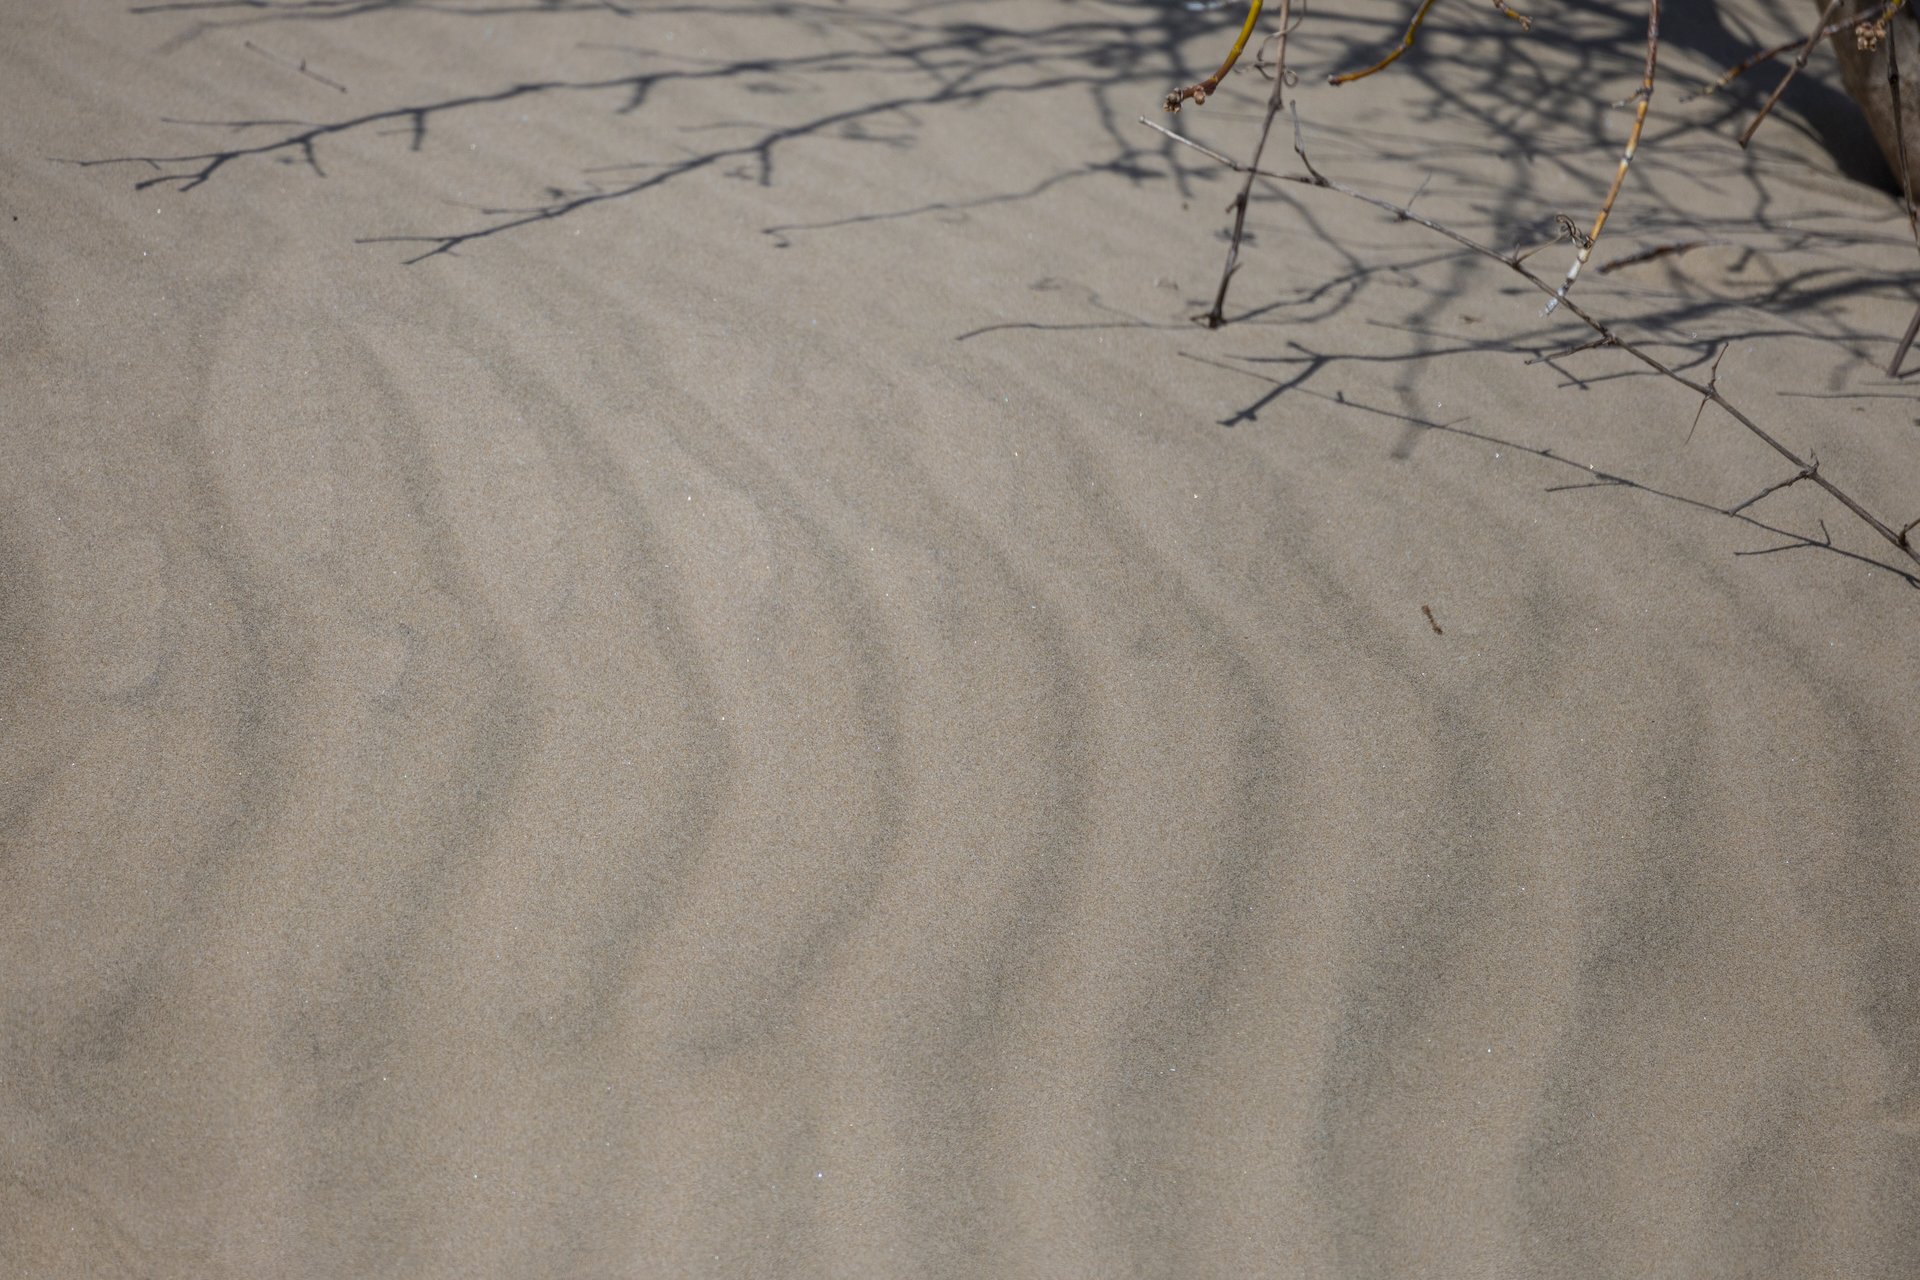  Ripples in the soft, fine sand.  